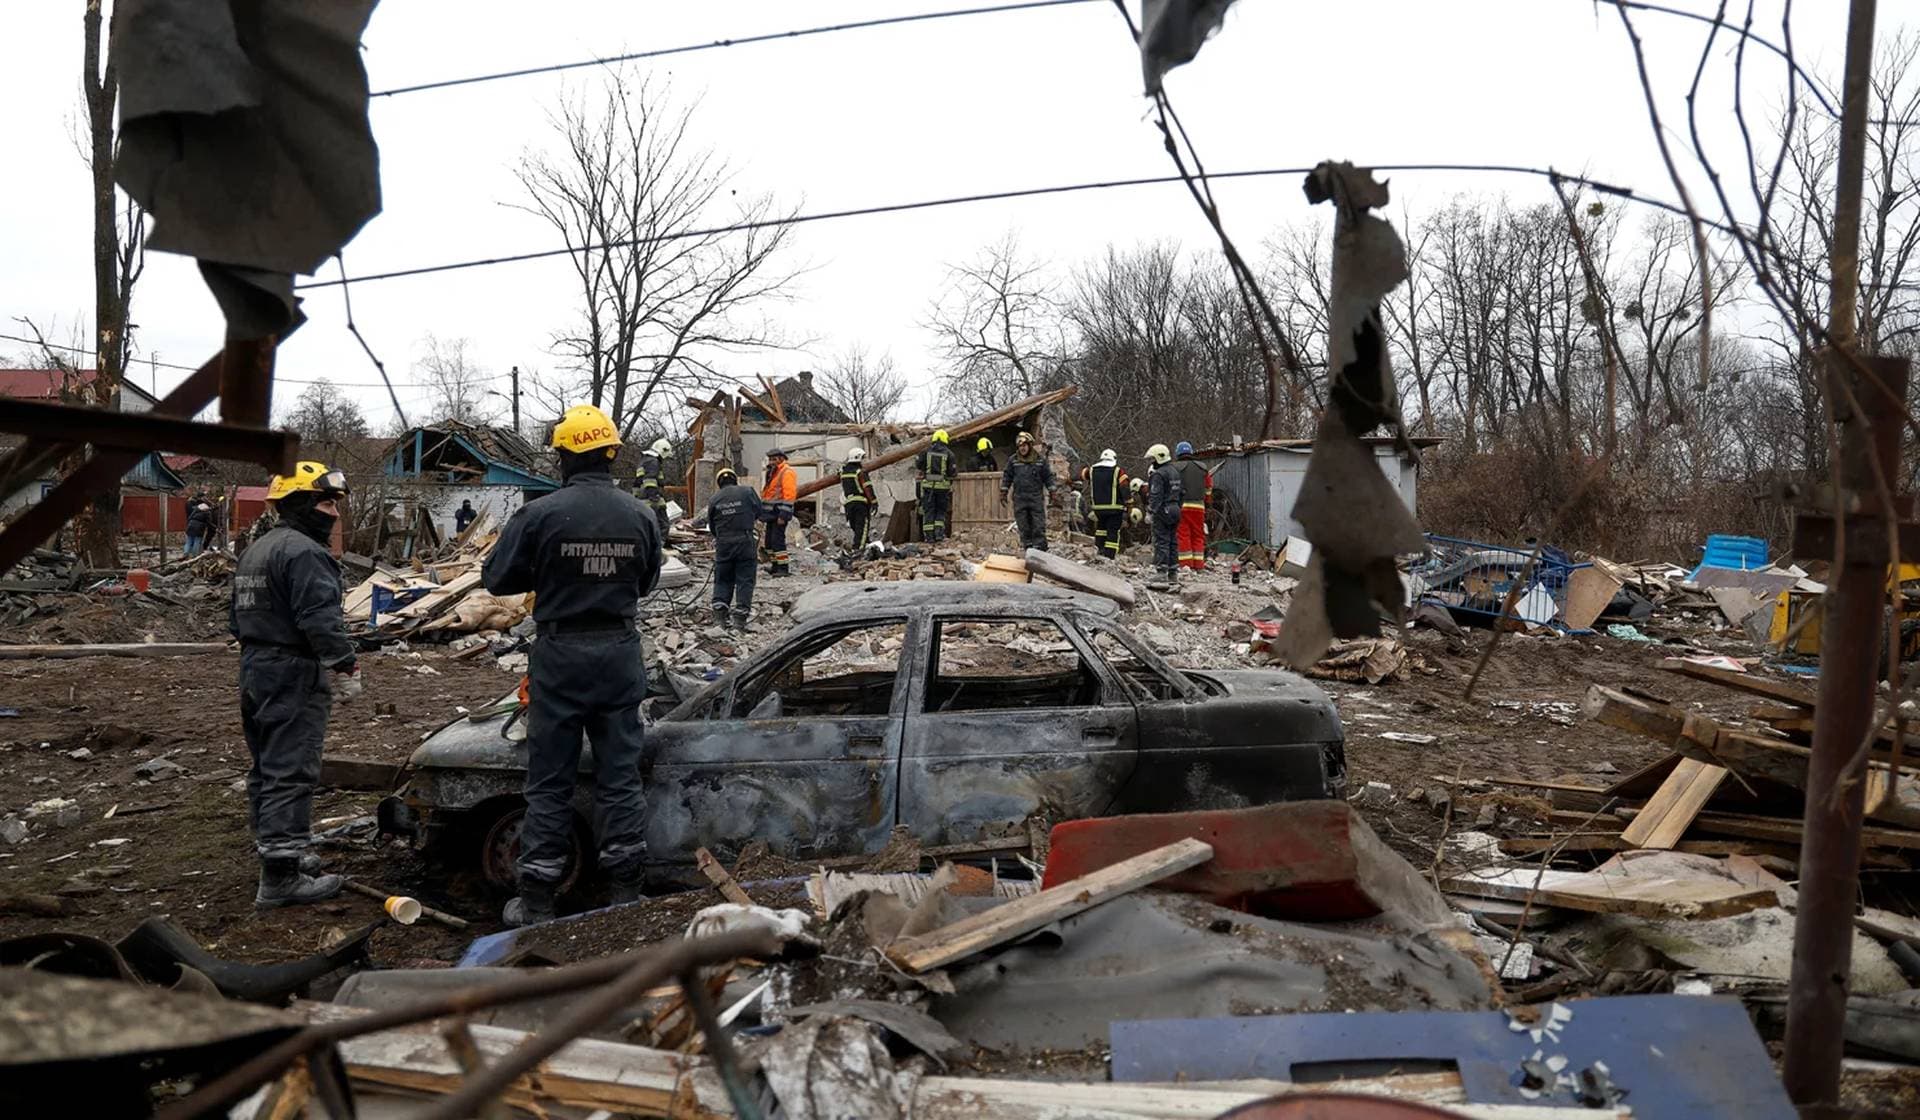 Rescuers work at a site of a residential house damaged during a Russian missile strike in Kyiv